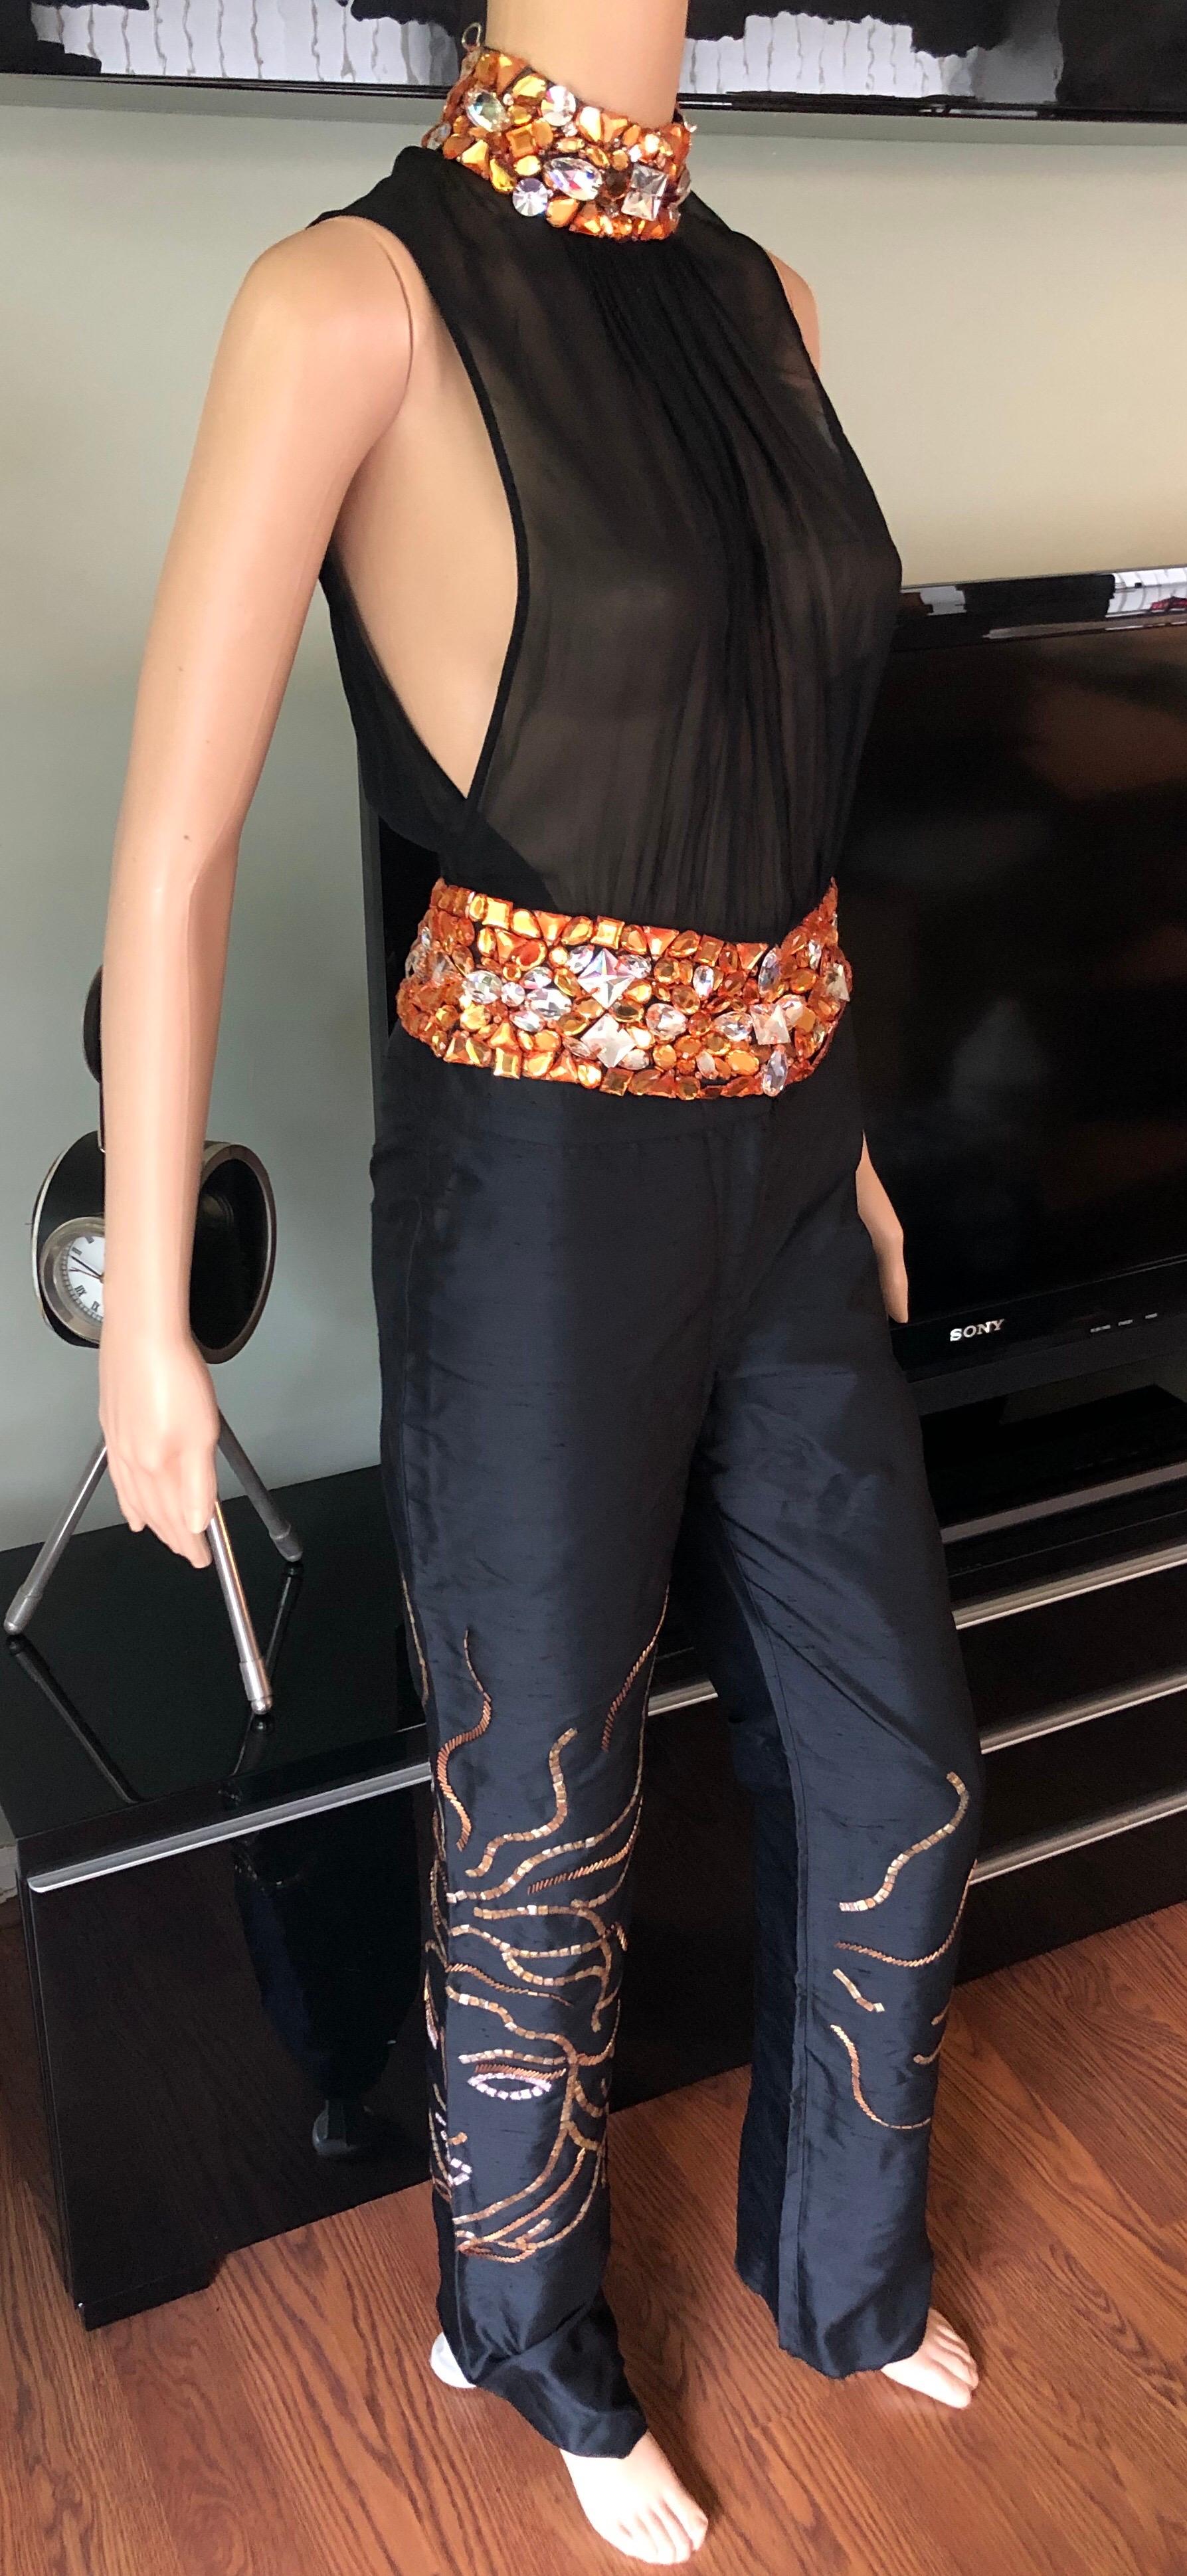 Gianni Versace Couture S/S 2000 Runway Embellished Sheer Black Top and Pants 2 Piece Set 

Gianni Versace sheer mock neck top featuring crystal embellishments on neck and waist and button closure at back IT 40. Gianni Versace silk embellished pants